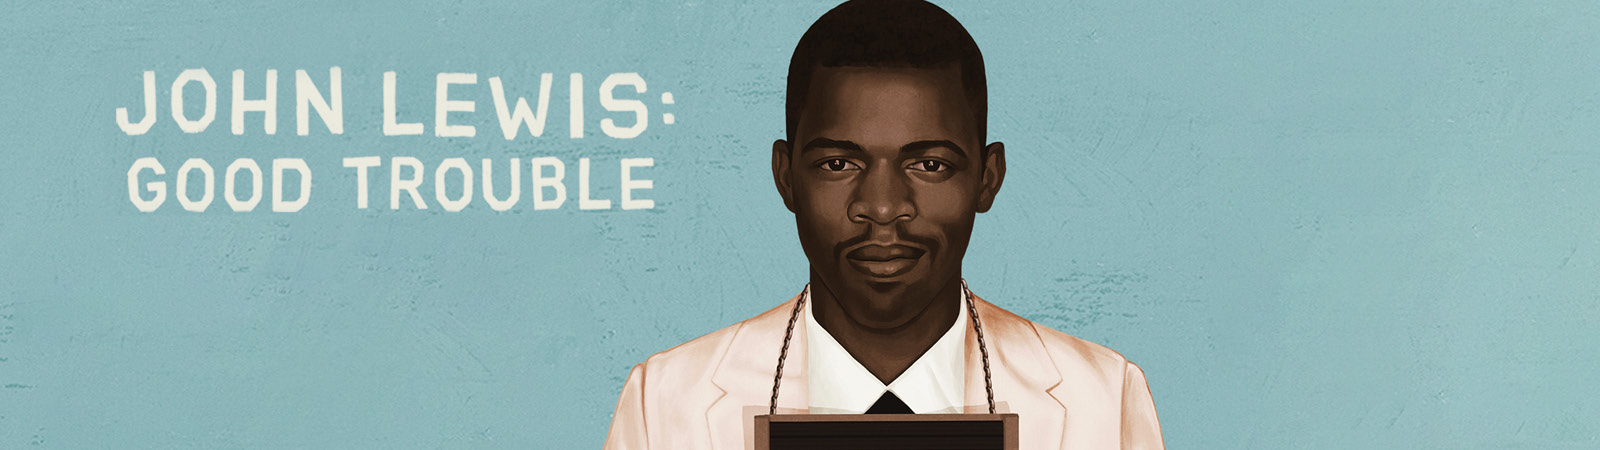 banner image for the John Lewis: Good trouble documentary